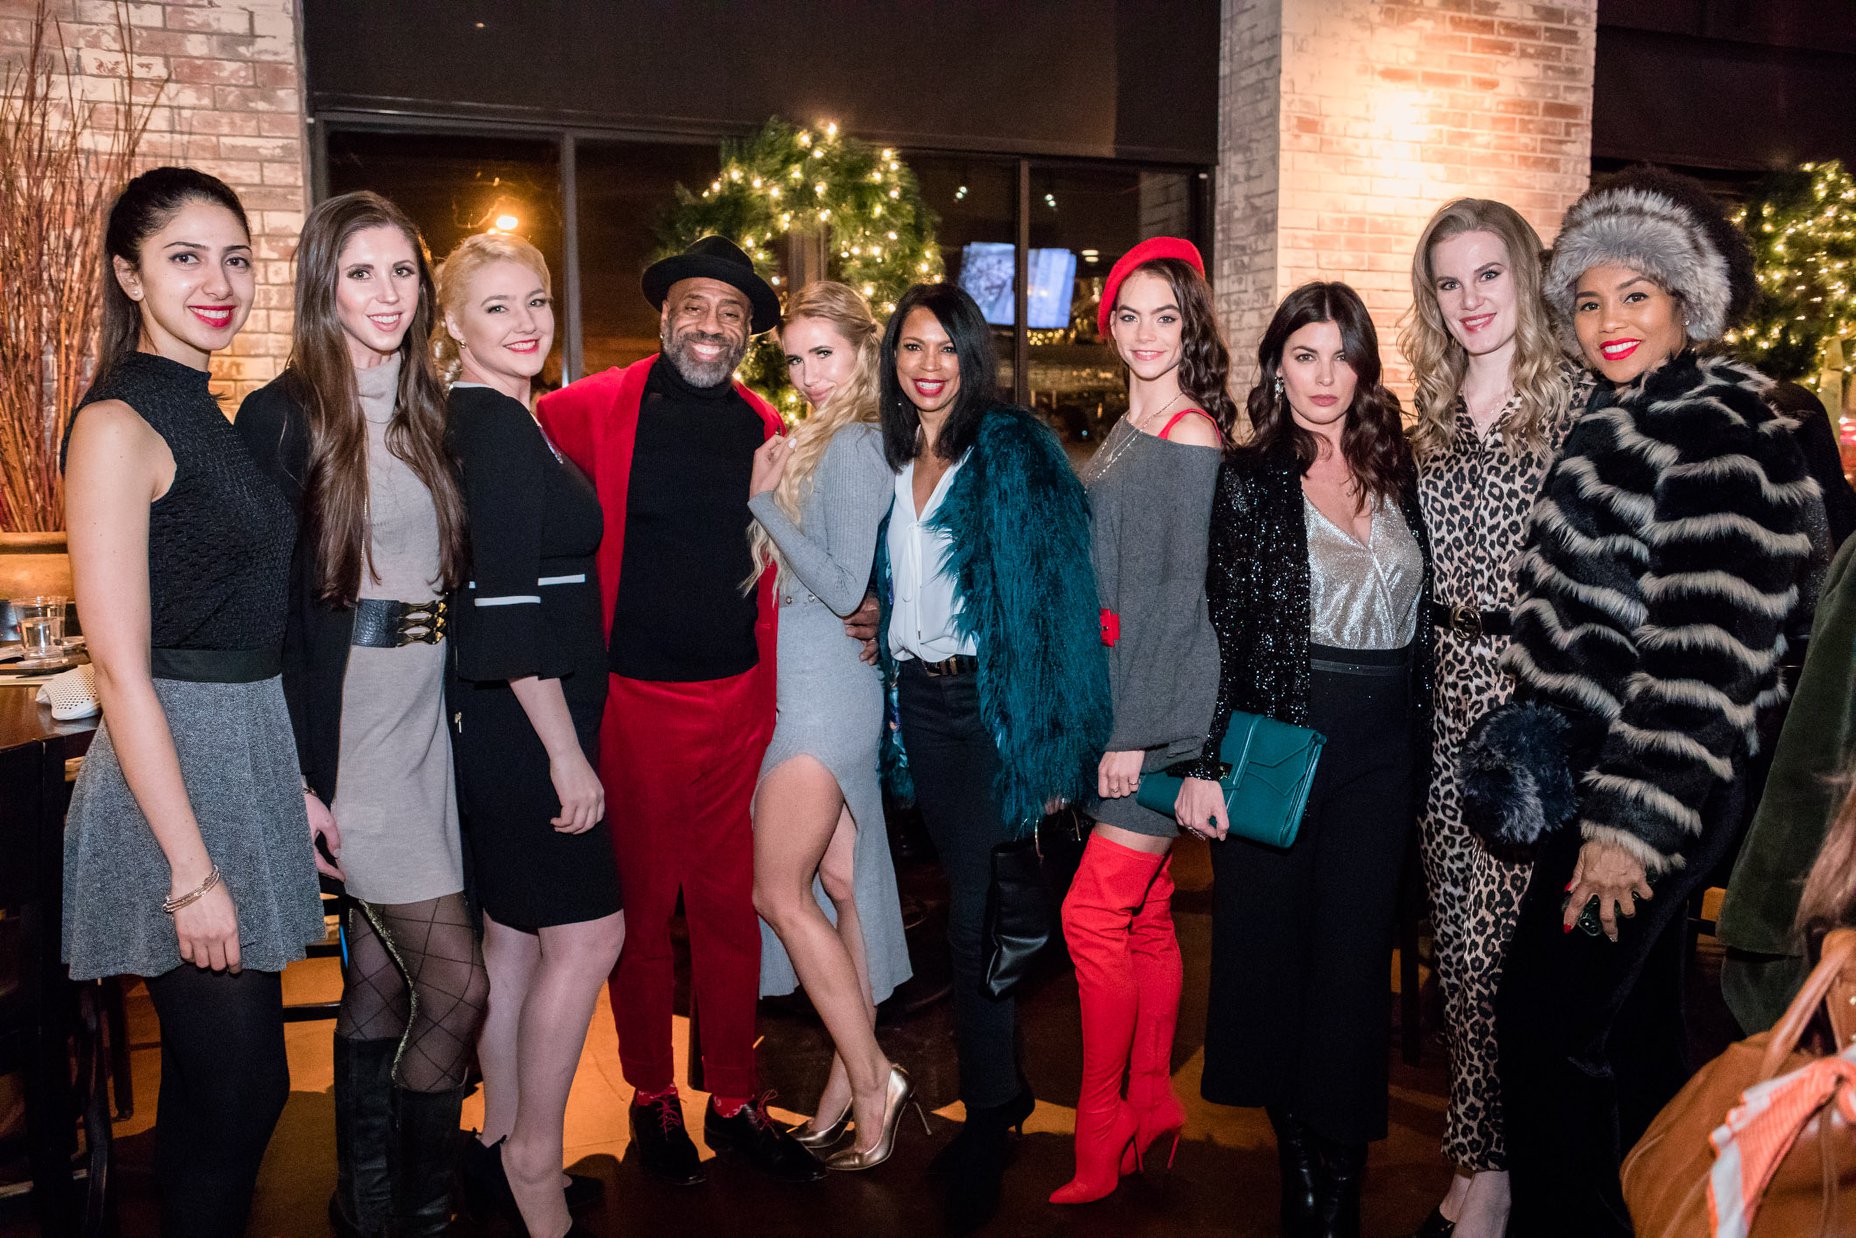 Richard Moody's Annual Holiday Party